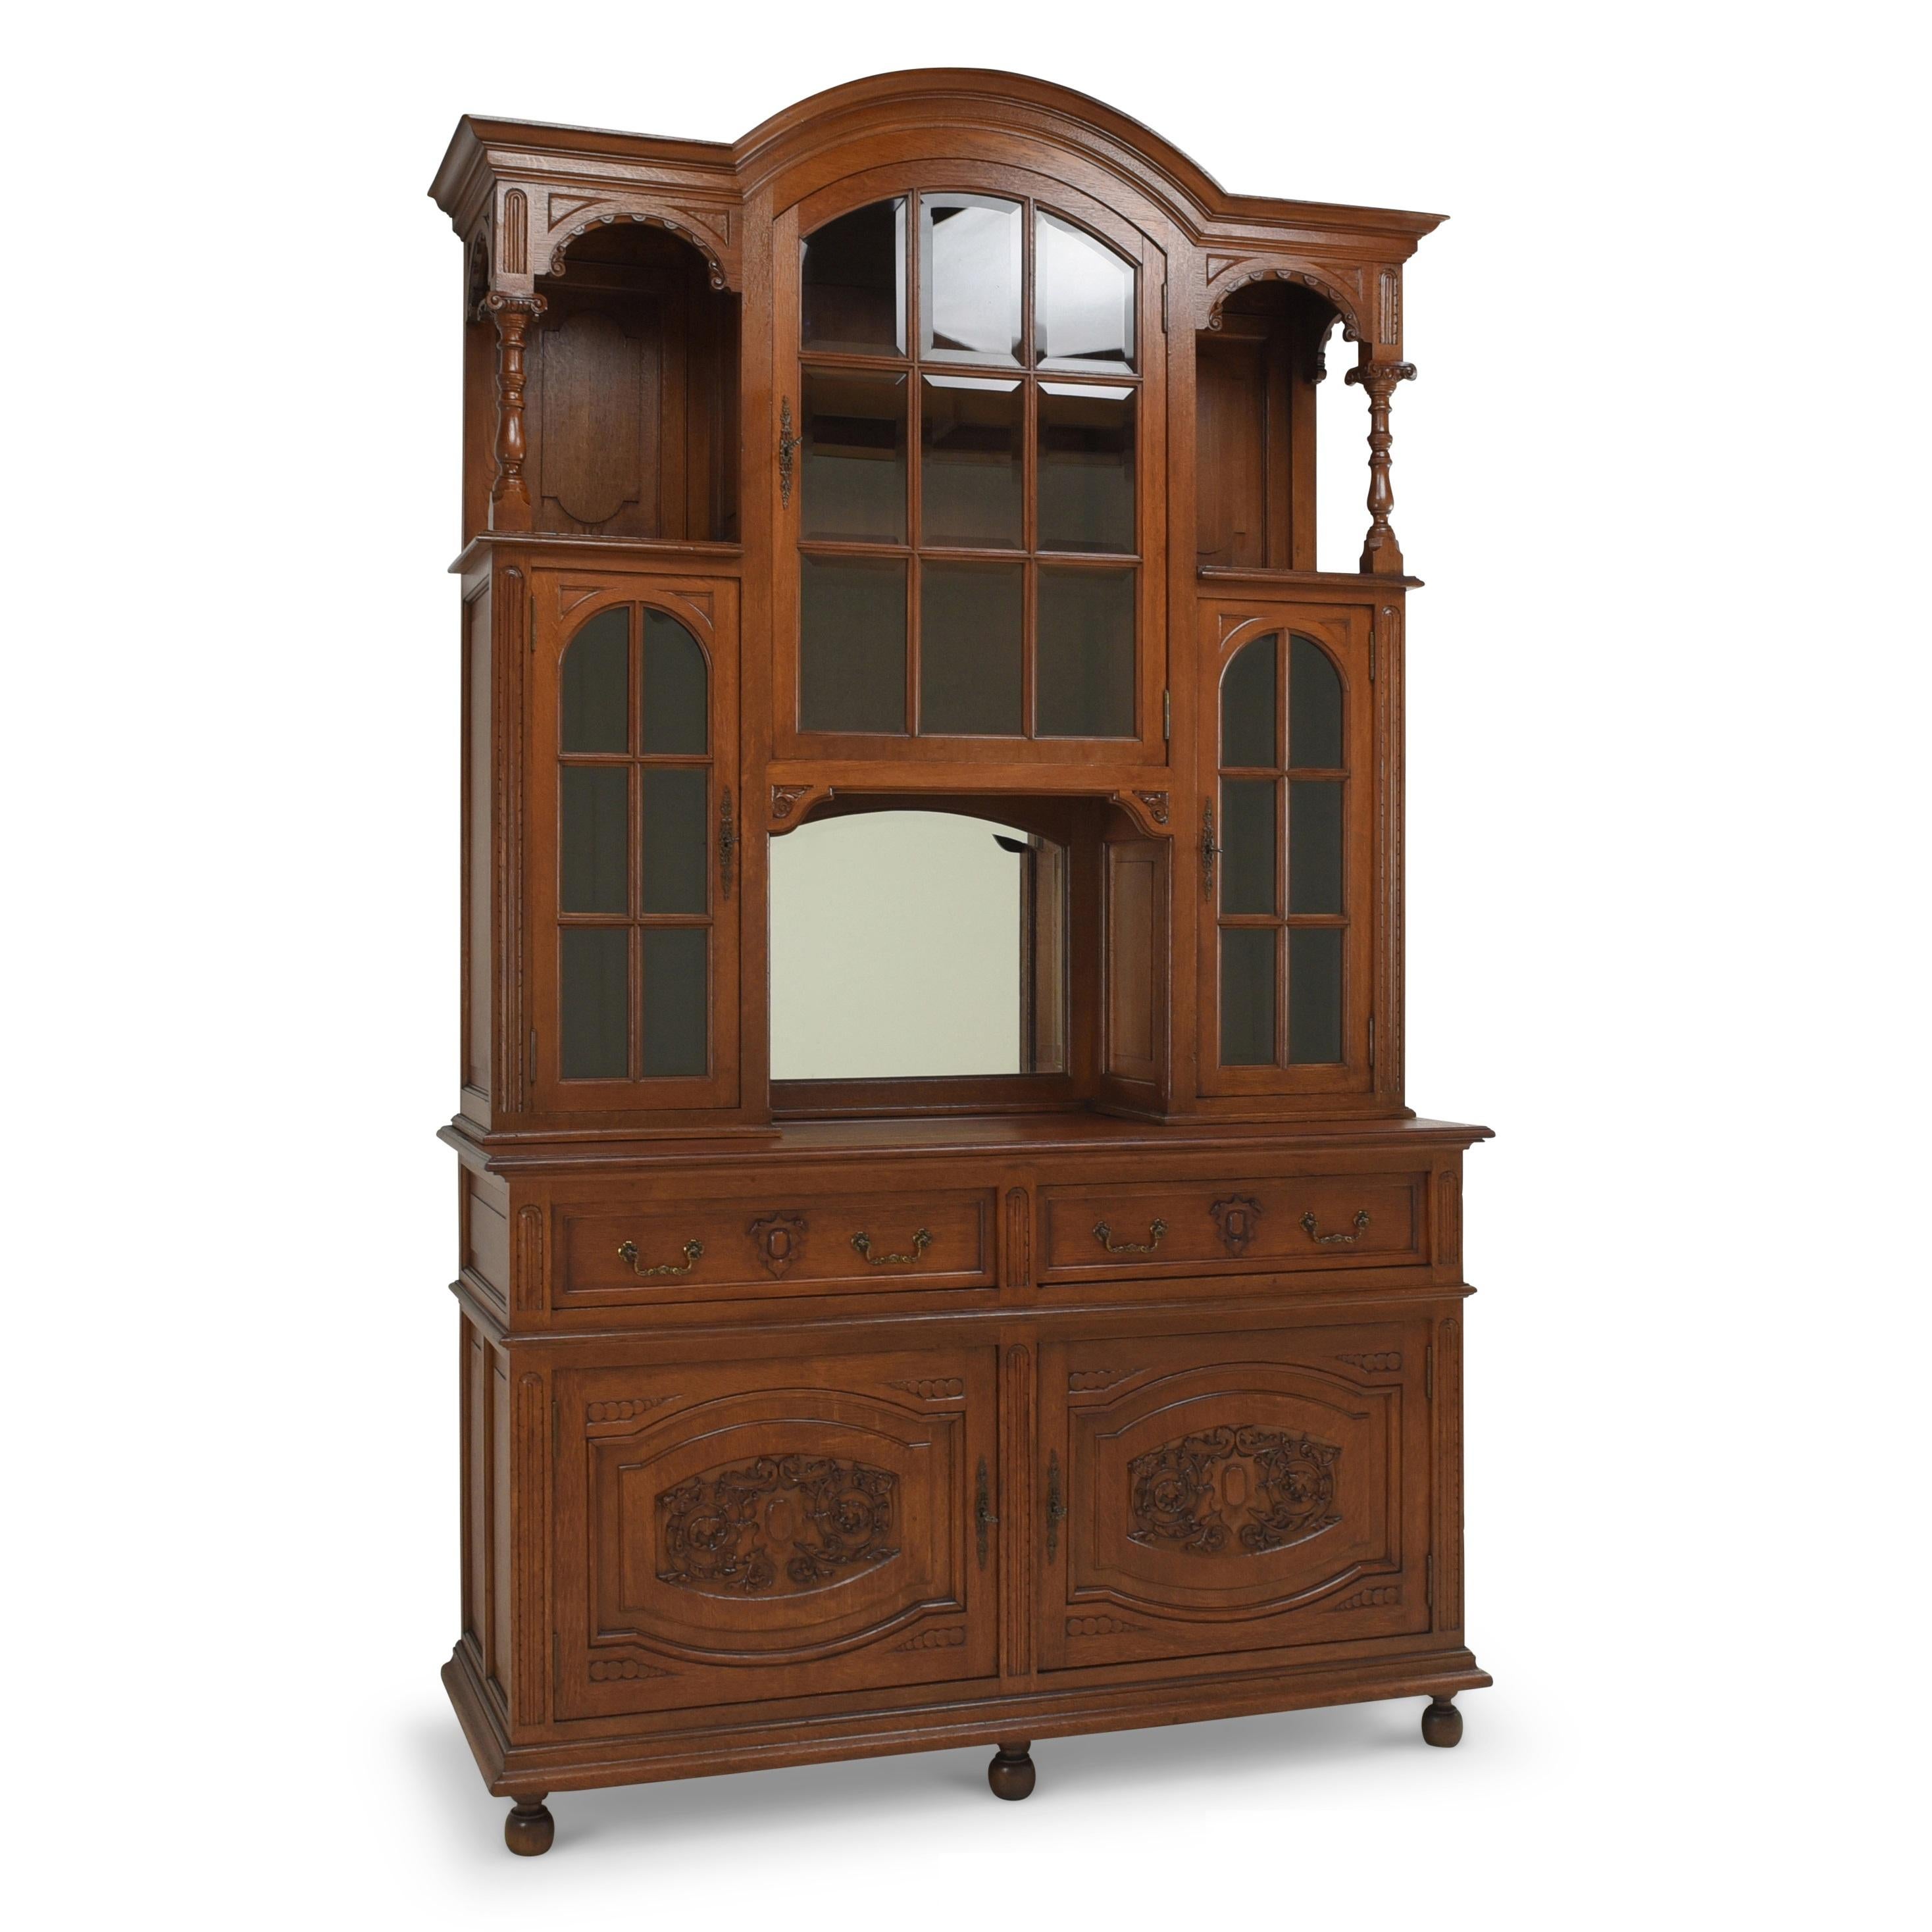 Large buffet restored Gründerzeit buffet cabinet solid oak high

Features:
High, Heavy quality
Drawers pronged
Beautiful carved decor
Original glazing with facet cut
Original fittings
Very high top with interesting division
Extraordinary